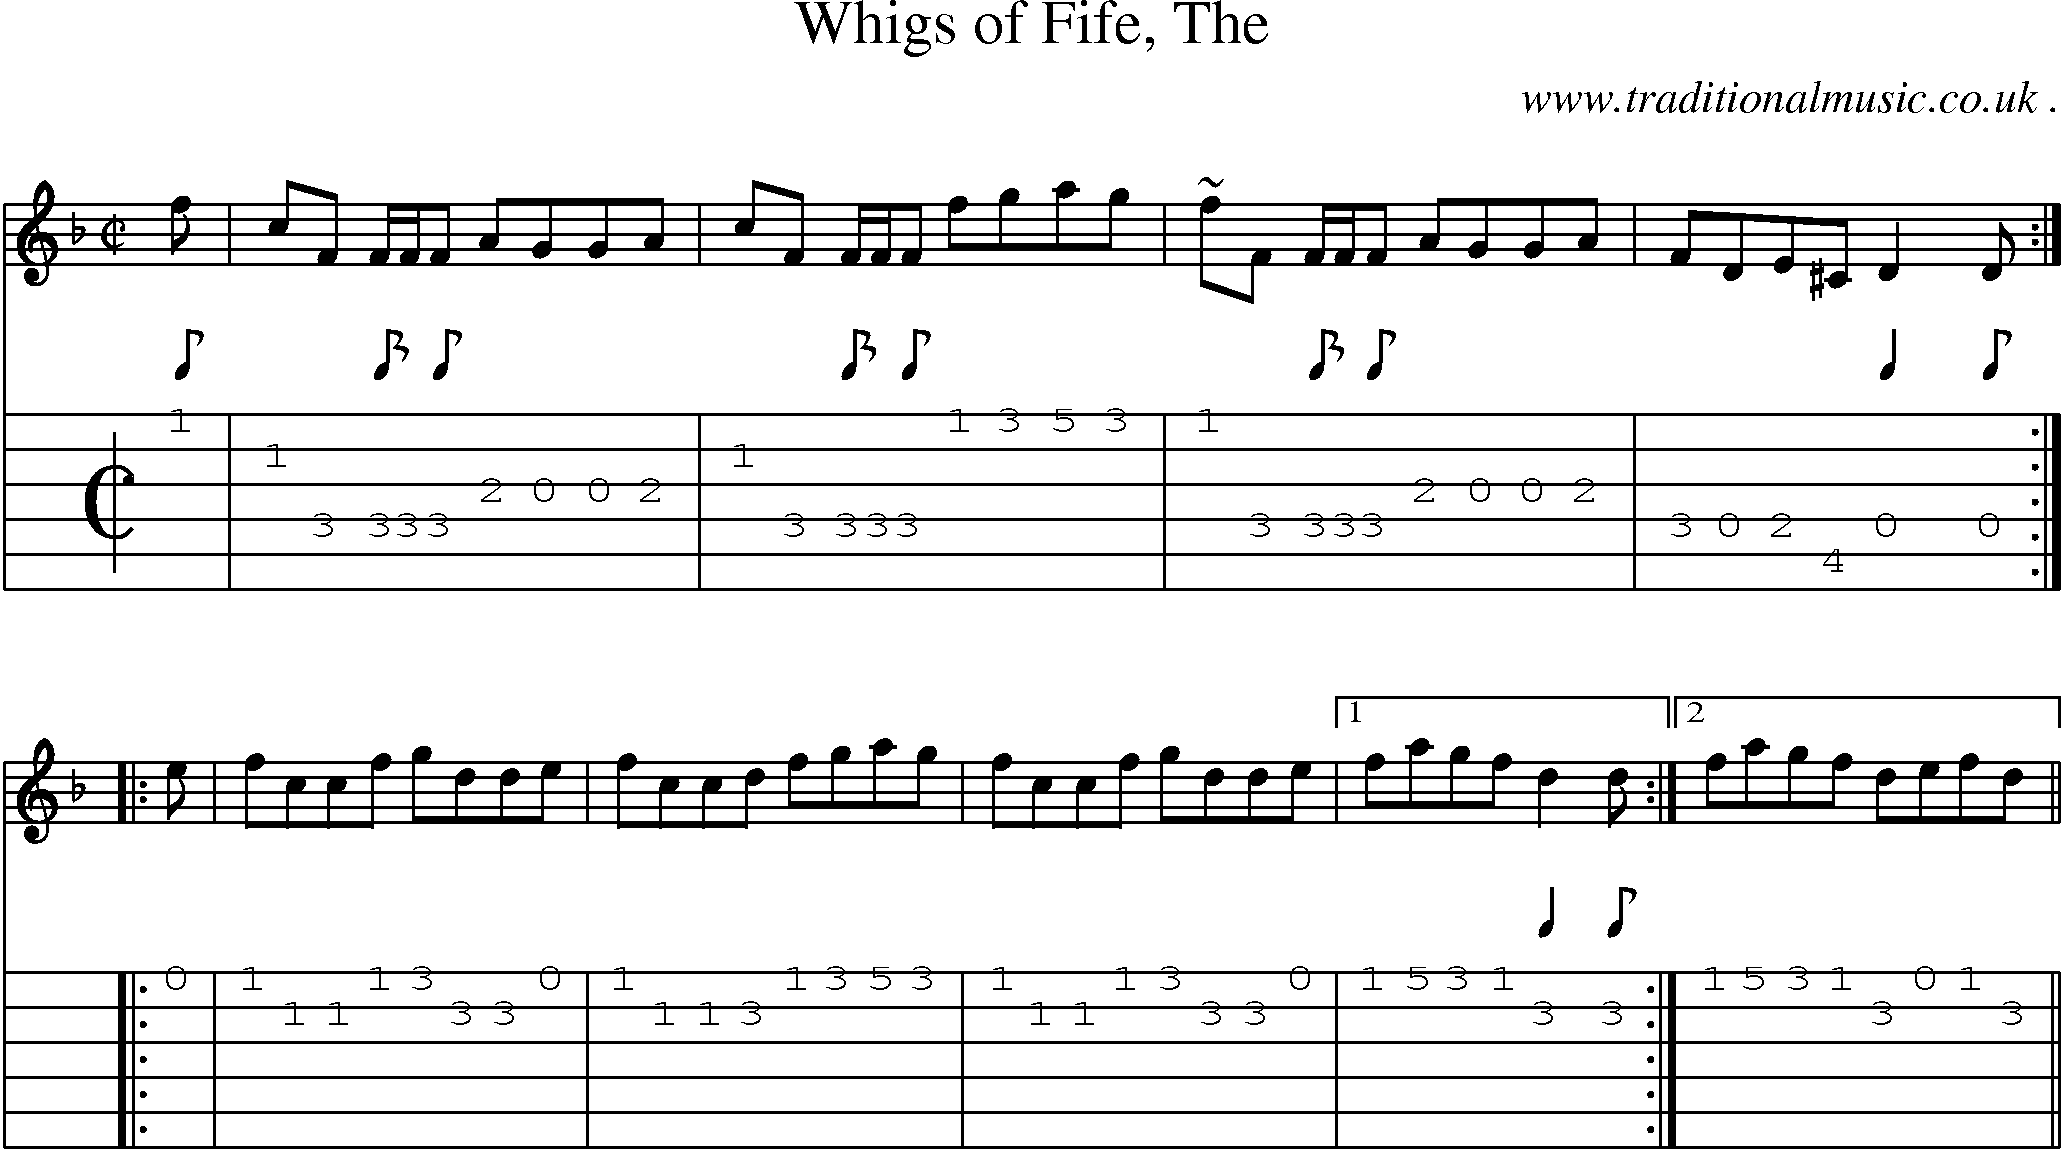 Sheet-music  score, Chords and Guitar Tabs for Whigs Of Fife The